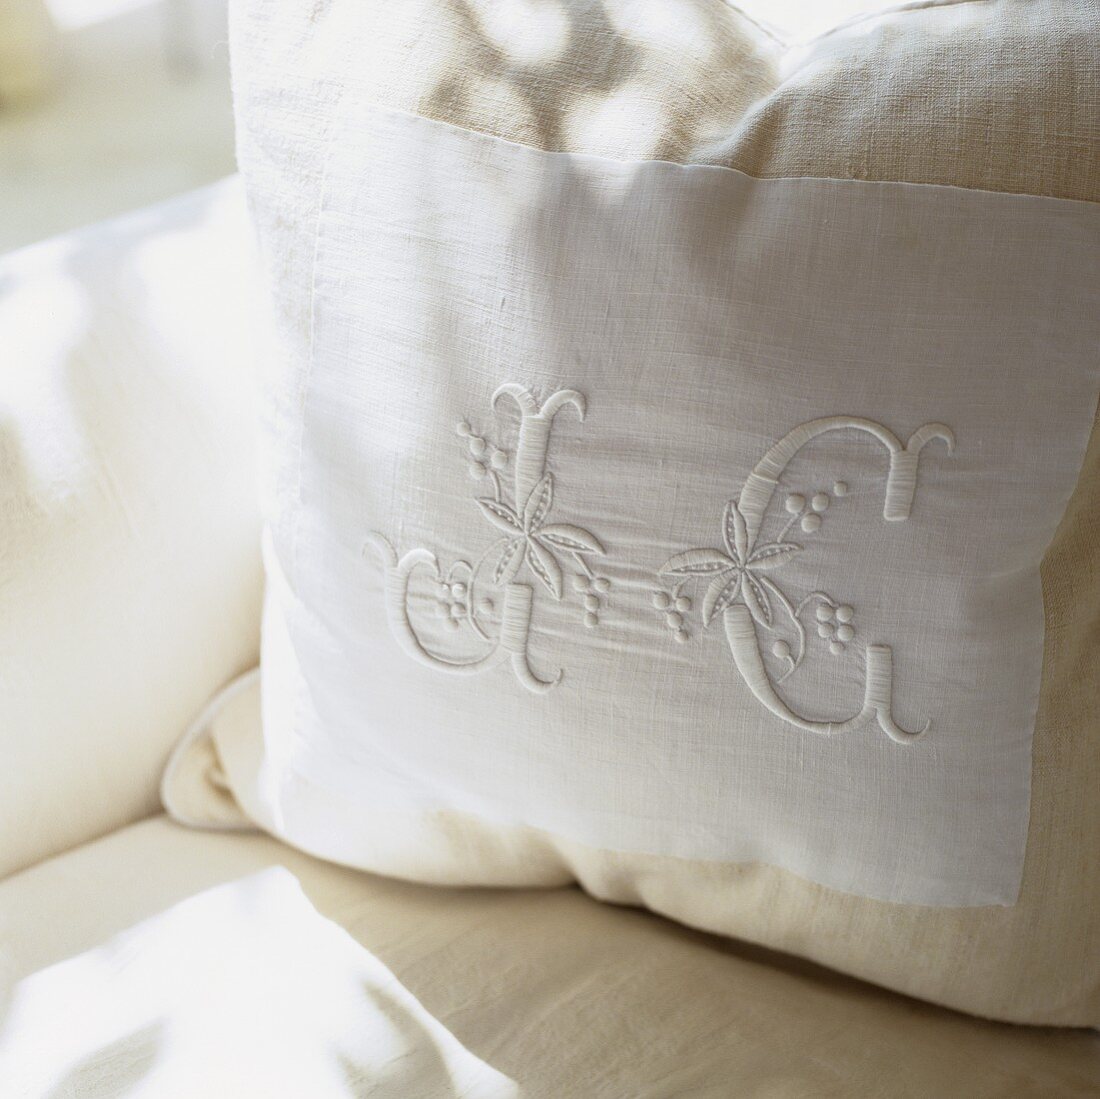 A white cushion embroidered with initials